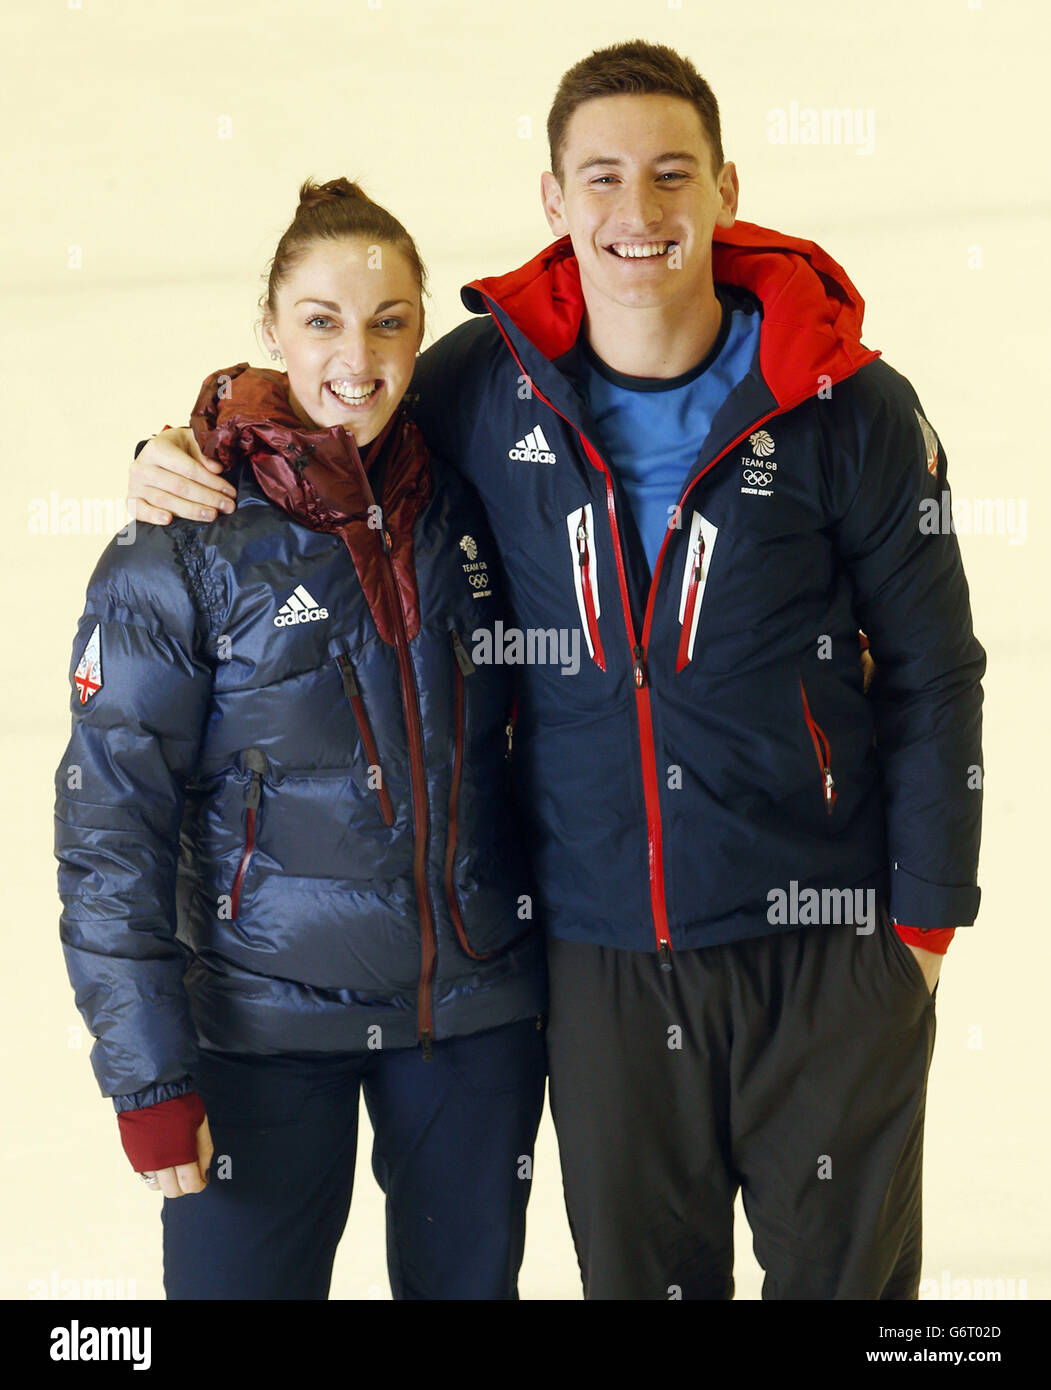 Winter Olympics - Team GB Figure Skating Photocall - Dundee Ice Arena. Team's GB Jenna McCorkell and Matthew Parr during a photocall at the Dundee Ice Arena, Dundee. Stock Photo